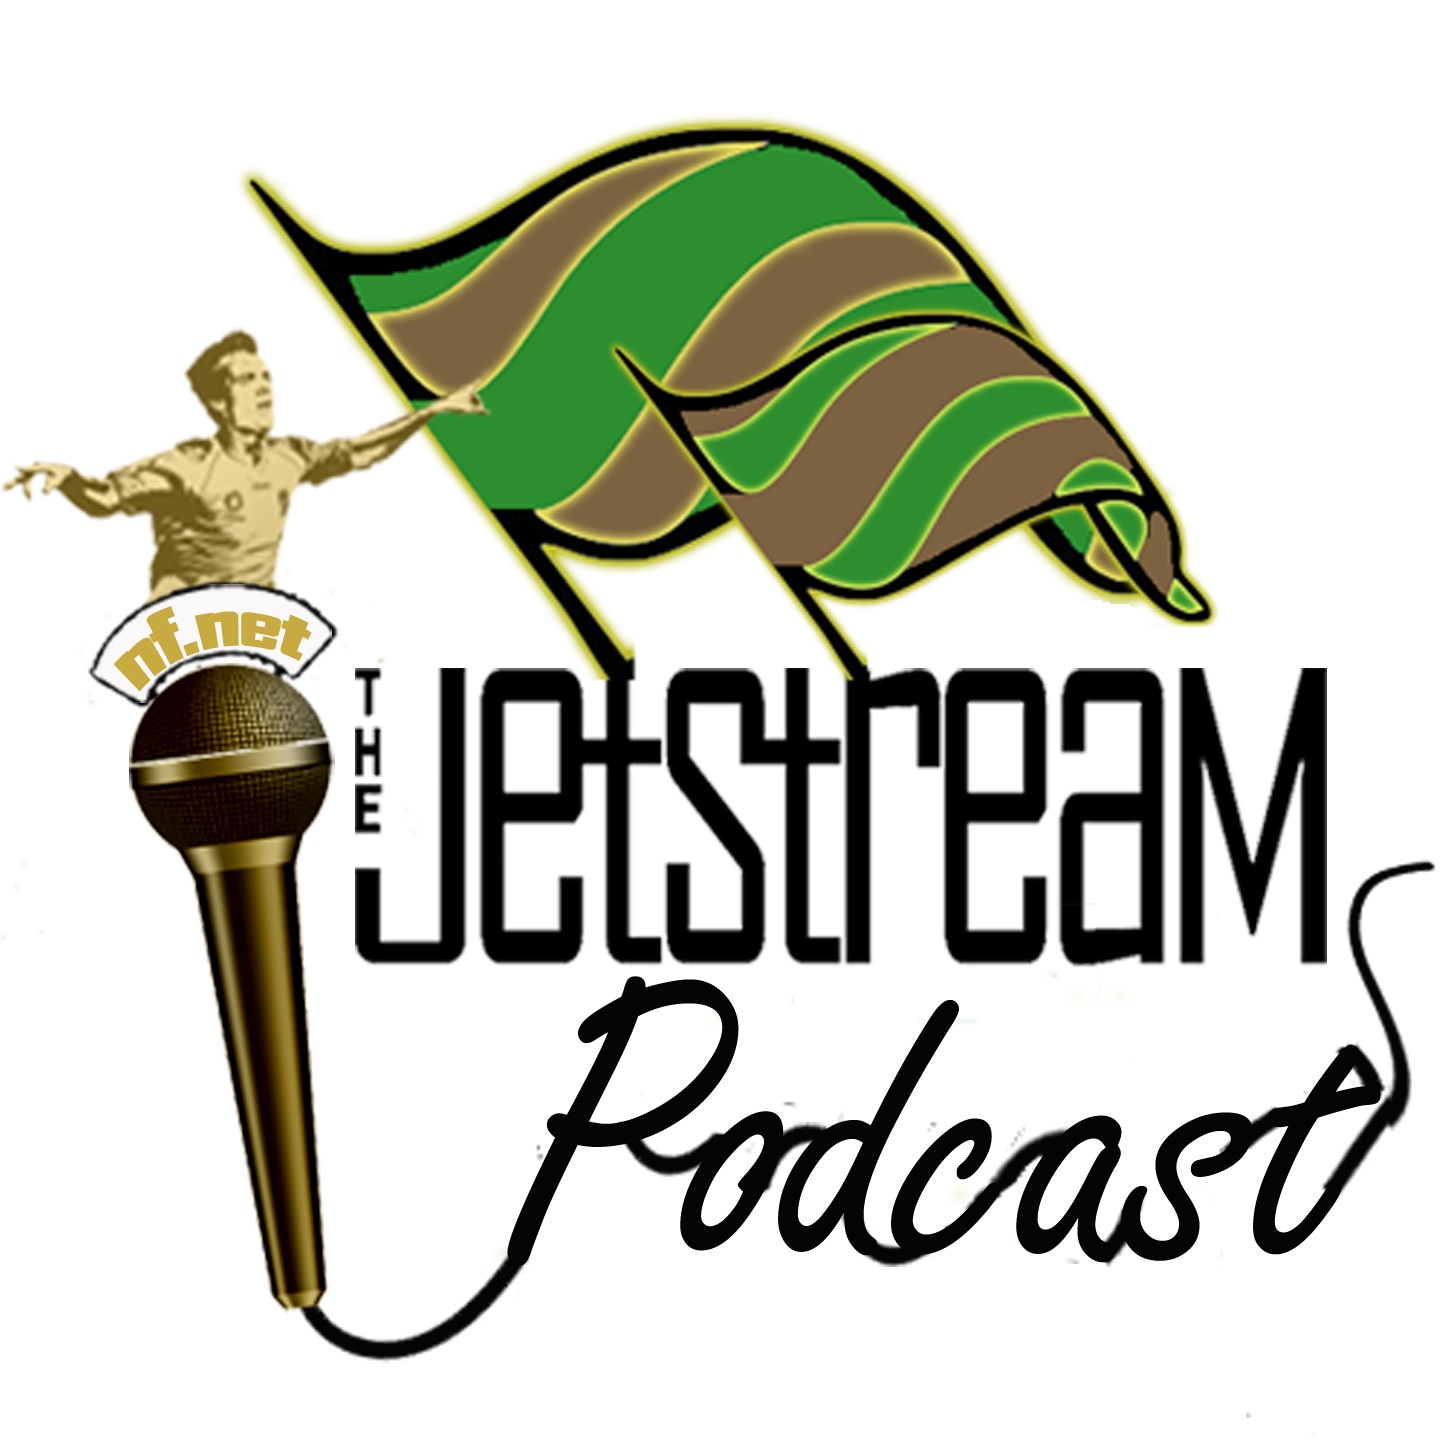 The Jetstream Podcast - an independent podcast created by and for supporters of the Newcastle United Jets FC, Hyundai A-League and Northern NSW Football